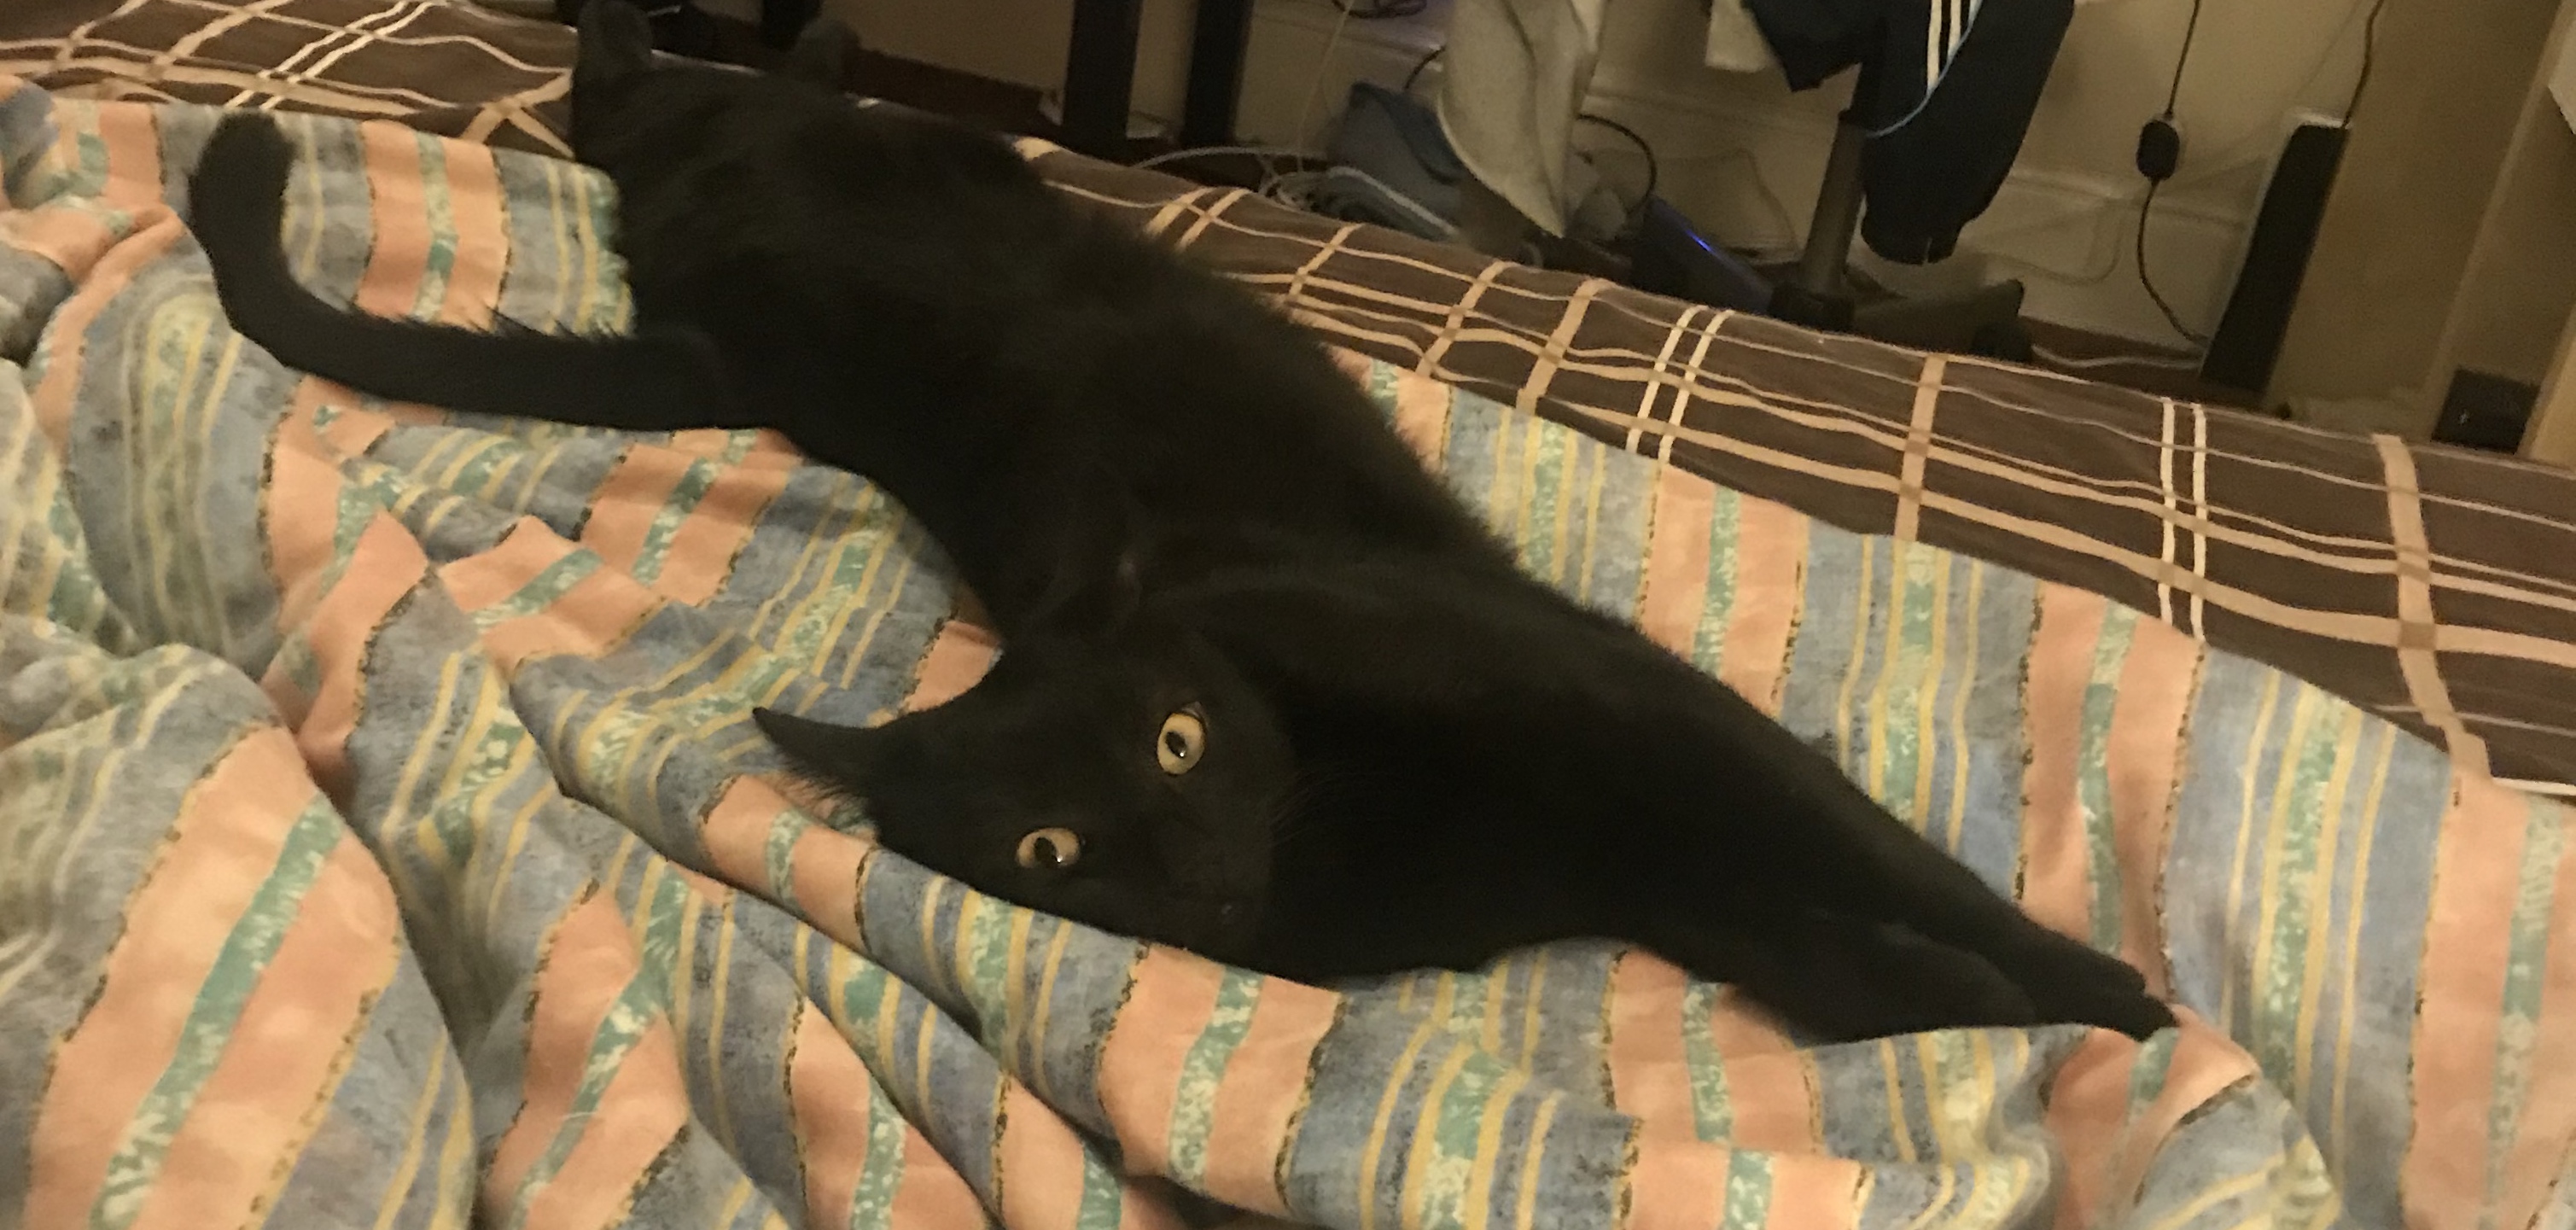 Panther cat doing a big stretch on the bed